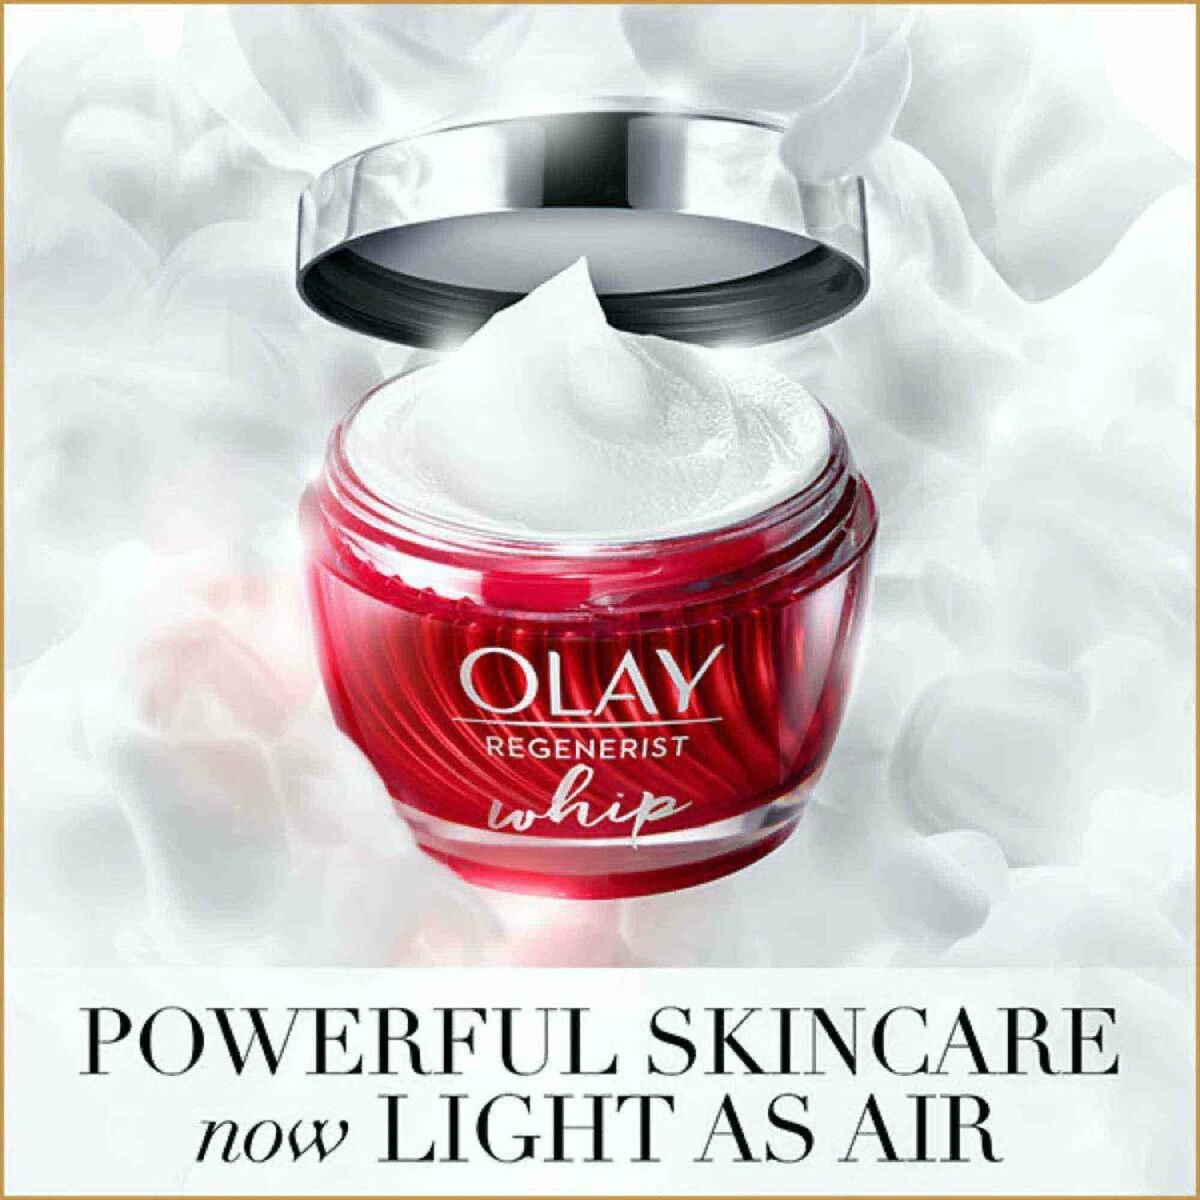 Olay Regenerist Whip Lightweight Face Moisturizer Without Greasiness with Hyaluronic Acid 50 g